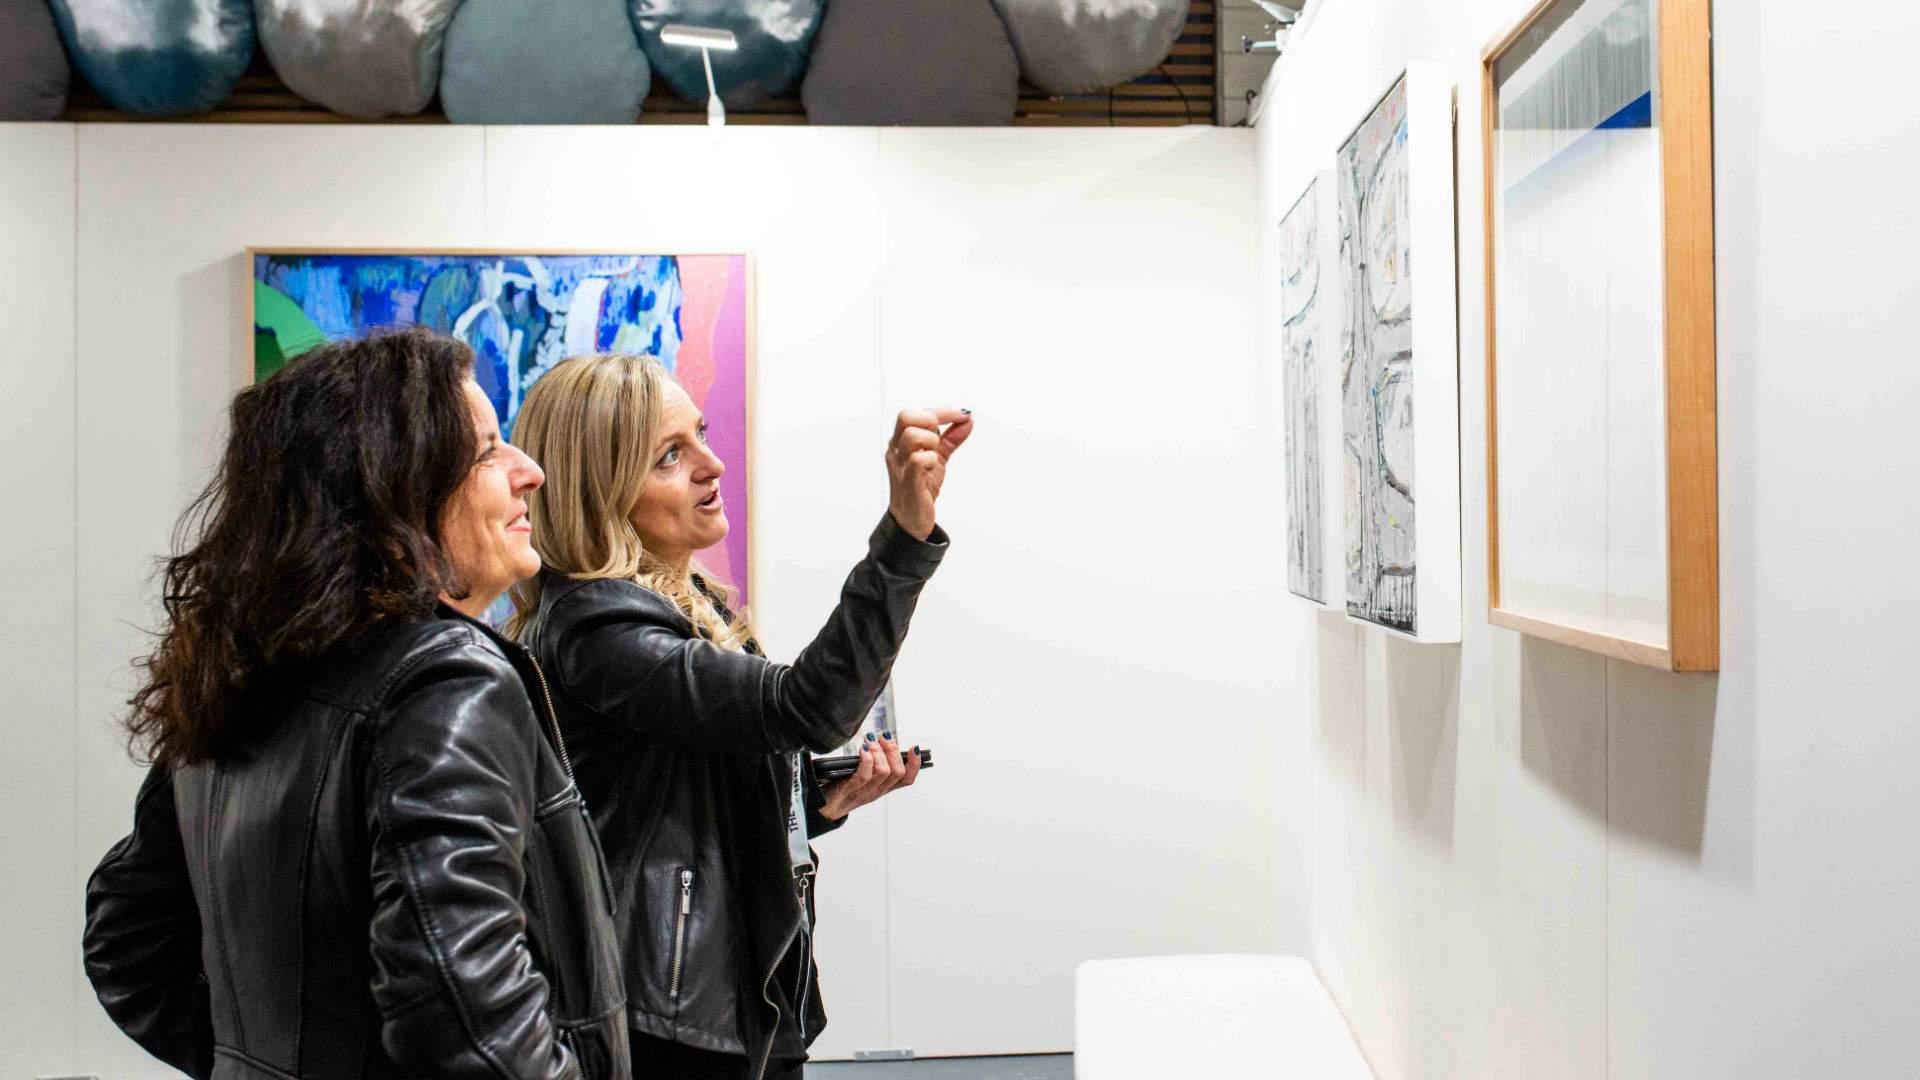 We're Giving Away An Artsy Experience at The Other Art Fair Sydney 2019